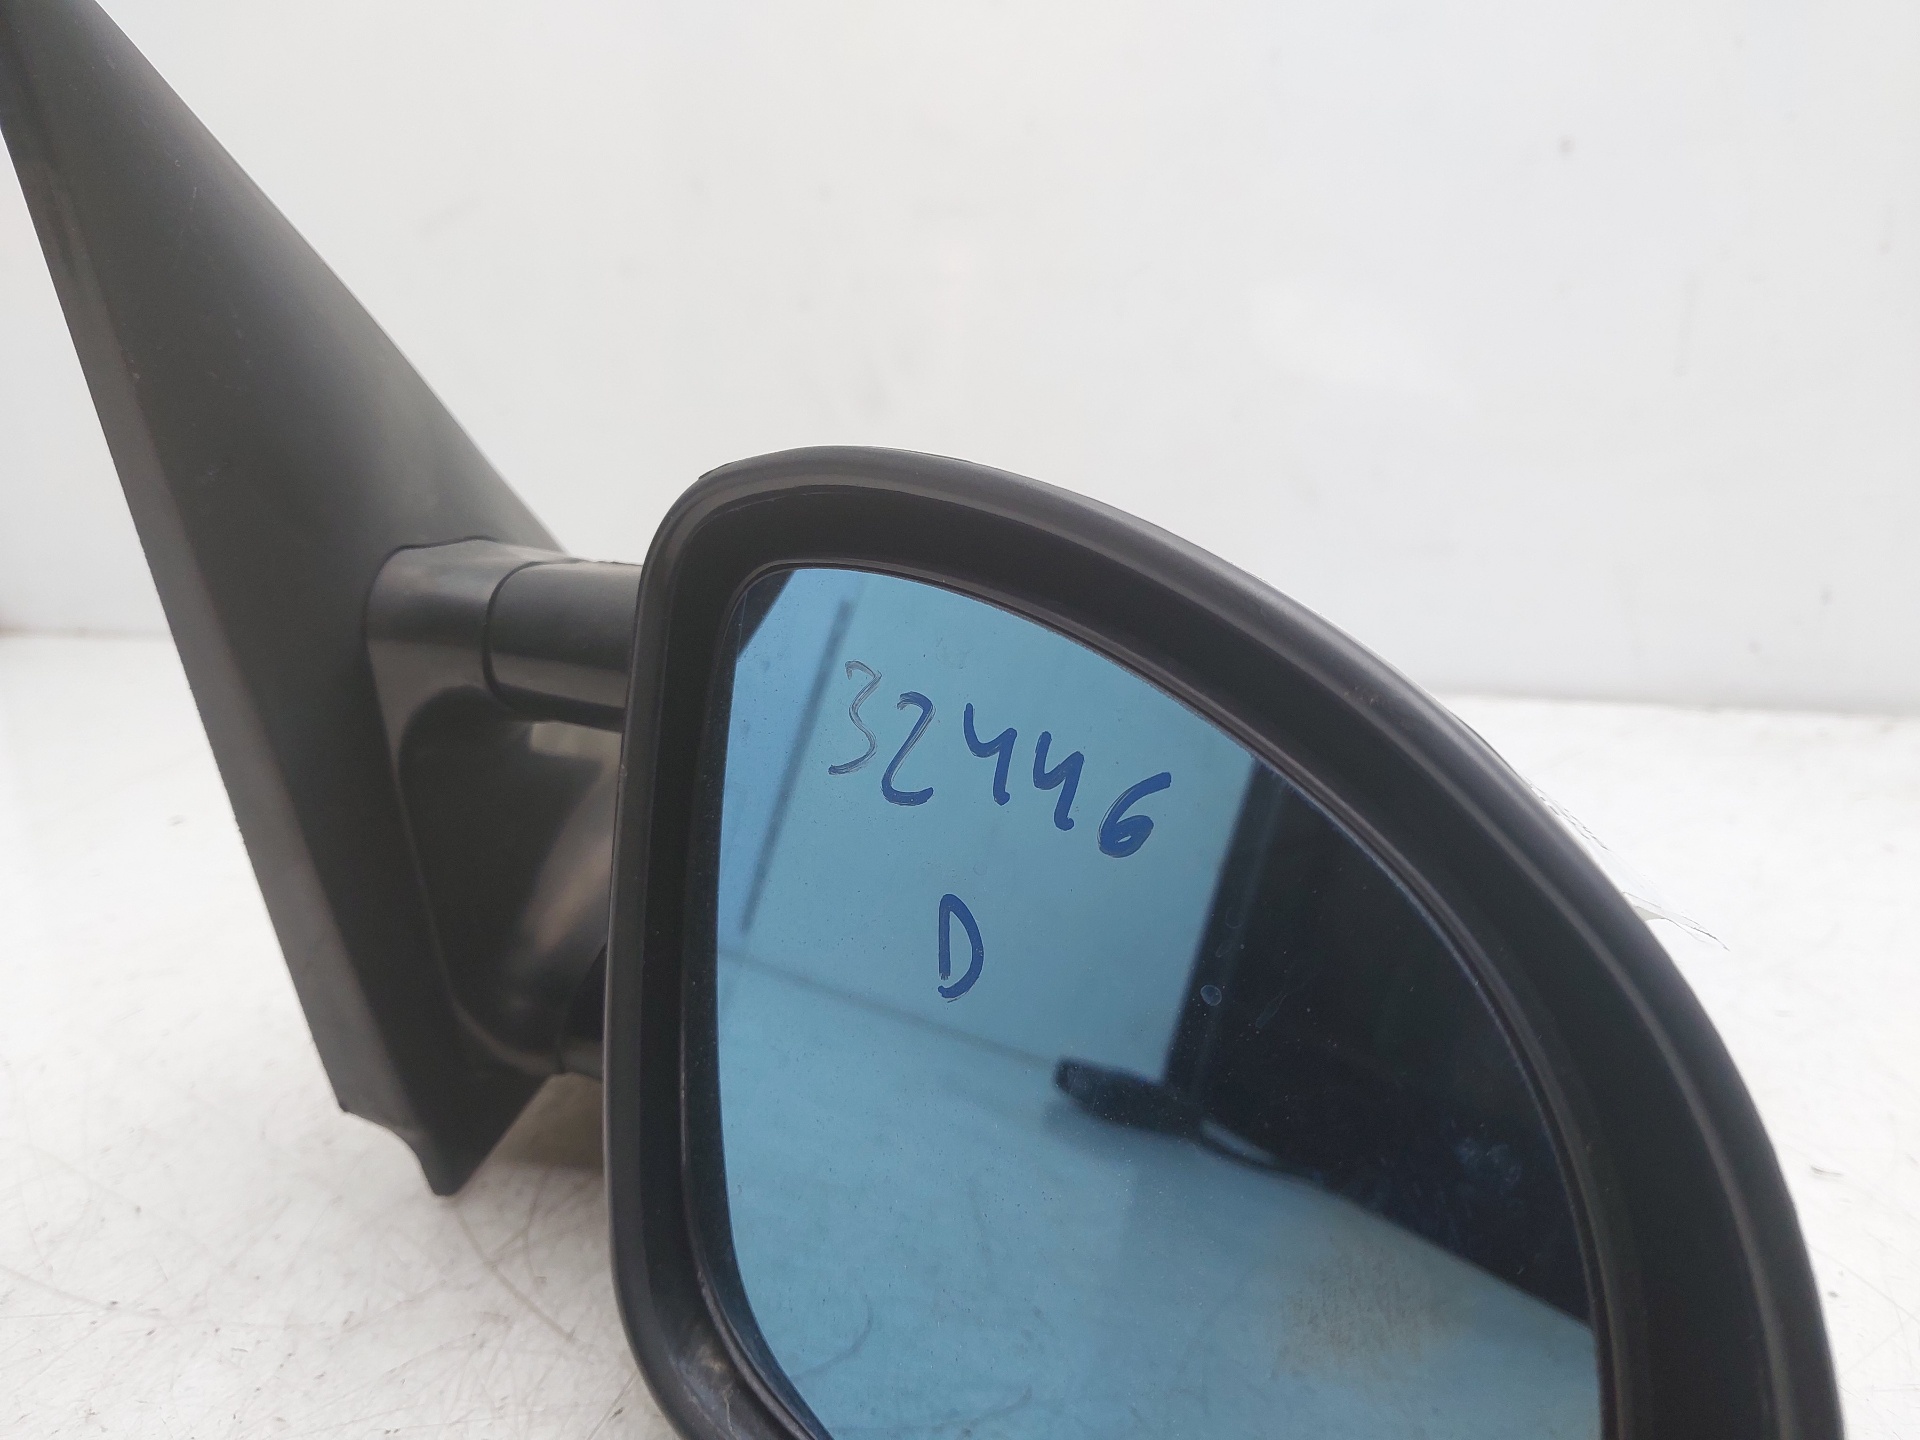 BMW 3 Series E46 (1997-2006) Right Side Wing Mirror 299002799 21483248